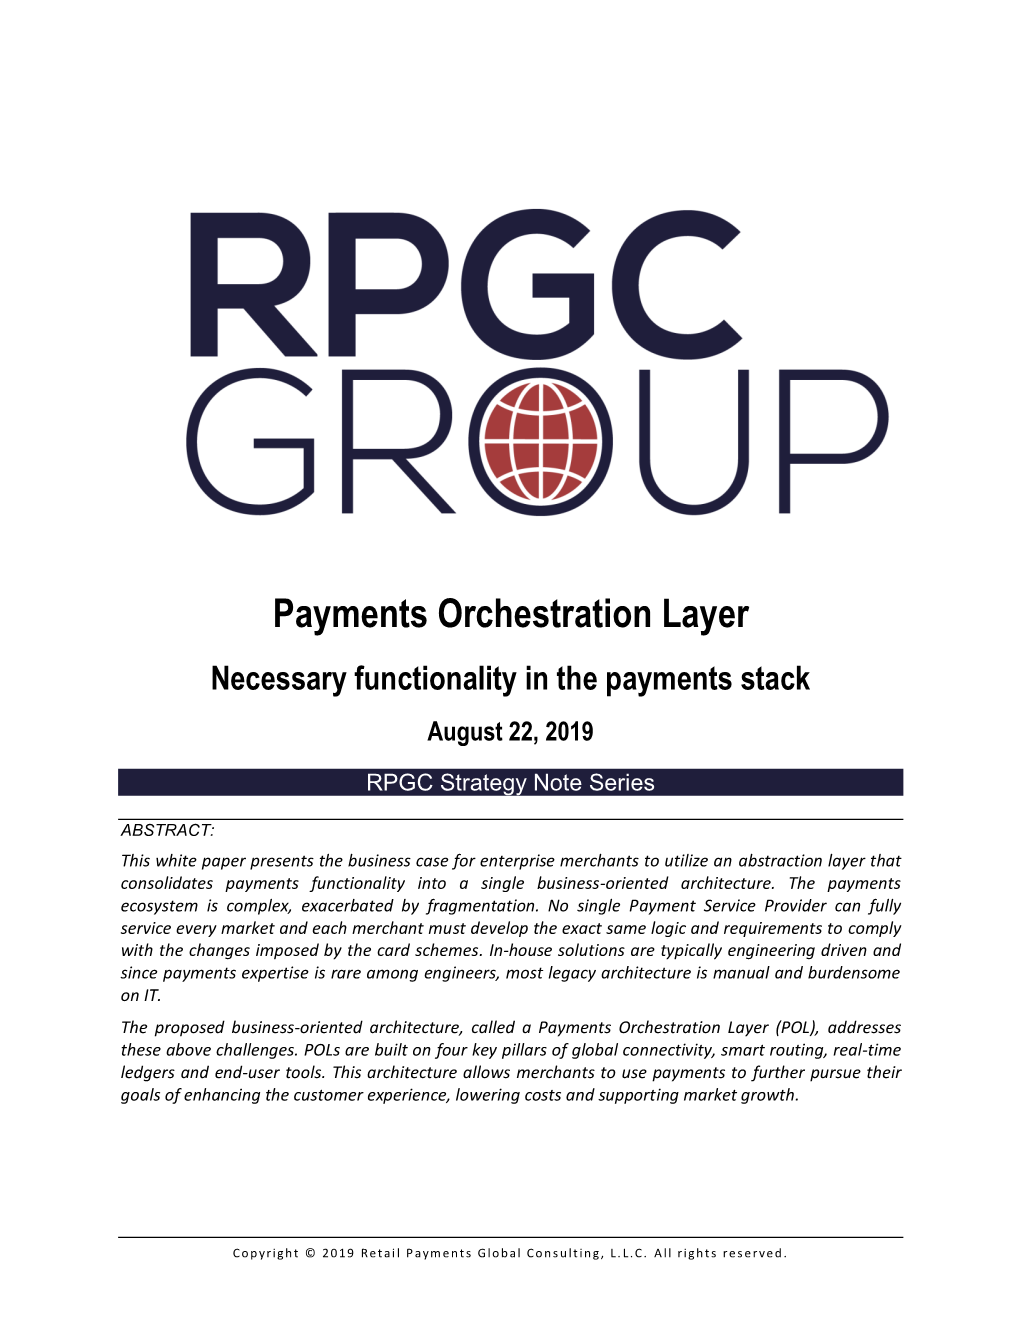 Payments Orchestration Layer Necessary Functionality in the Payments Stack August 22, 2019